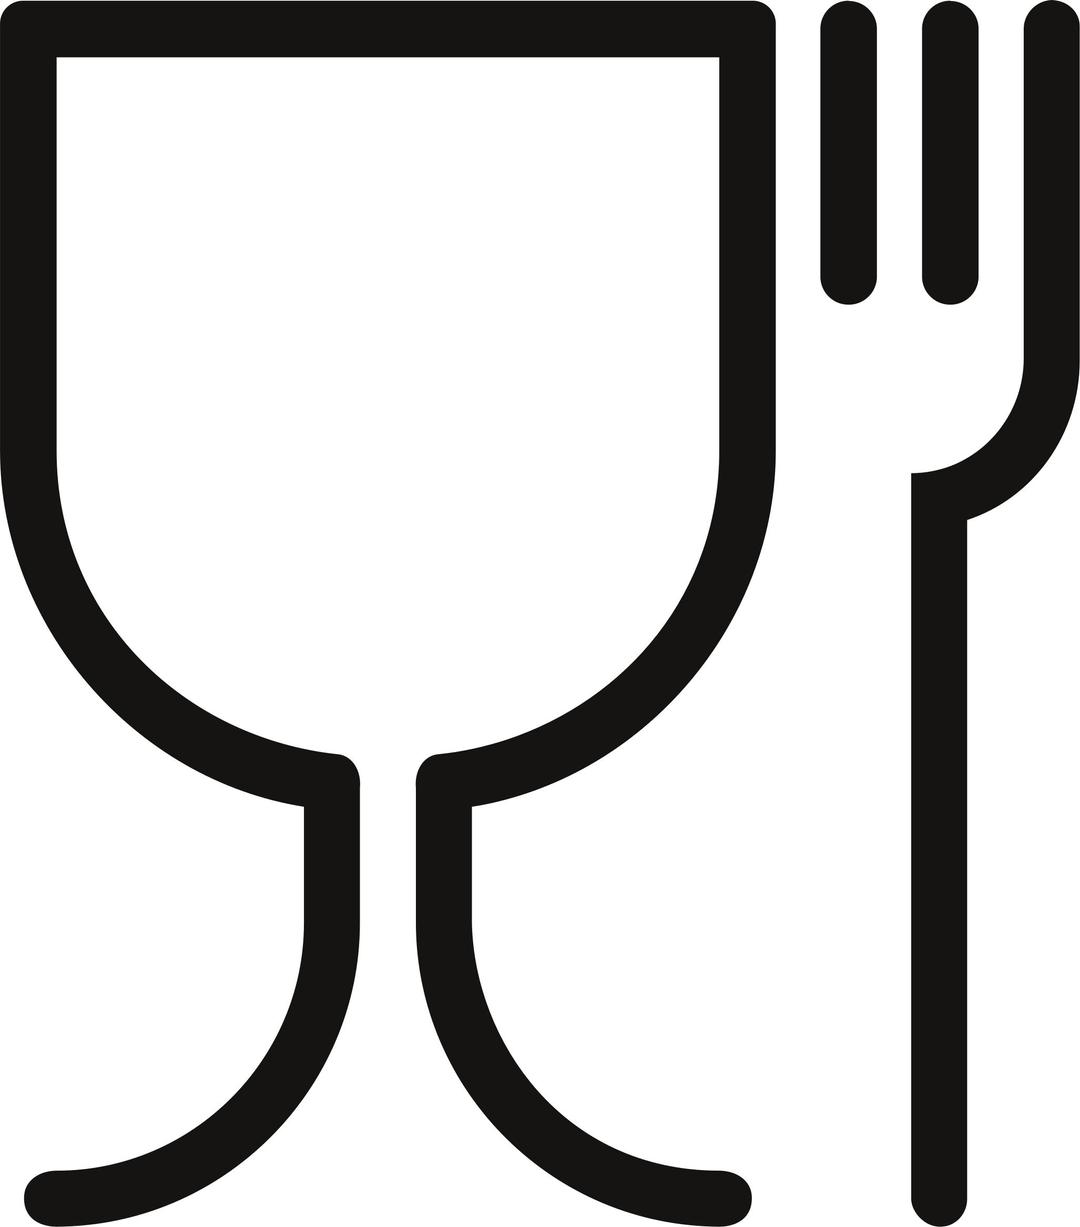 Glass and fork - non toxic material symbol png transparent